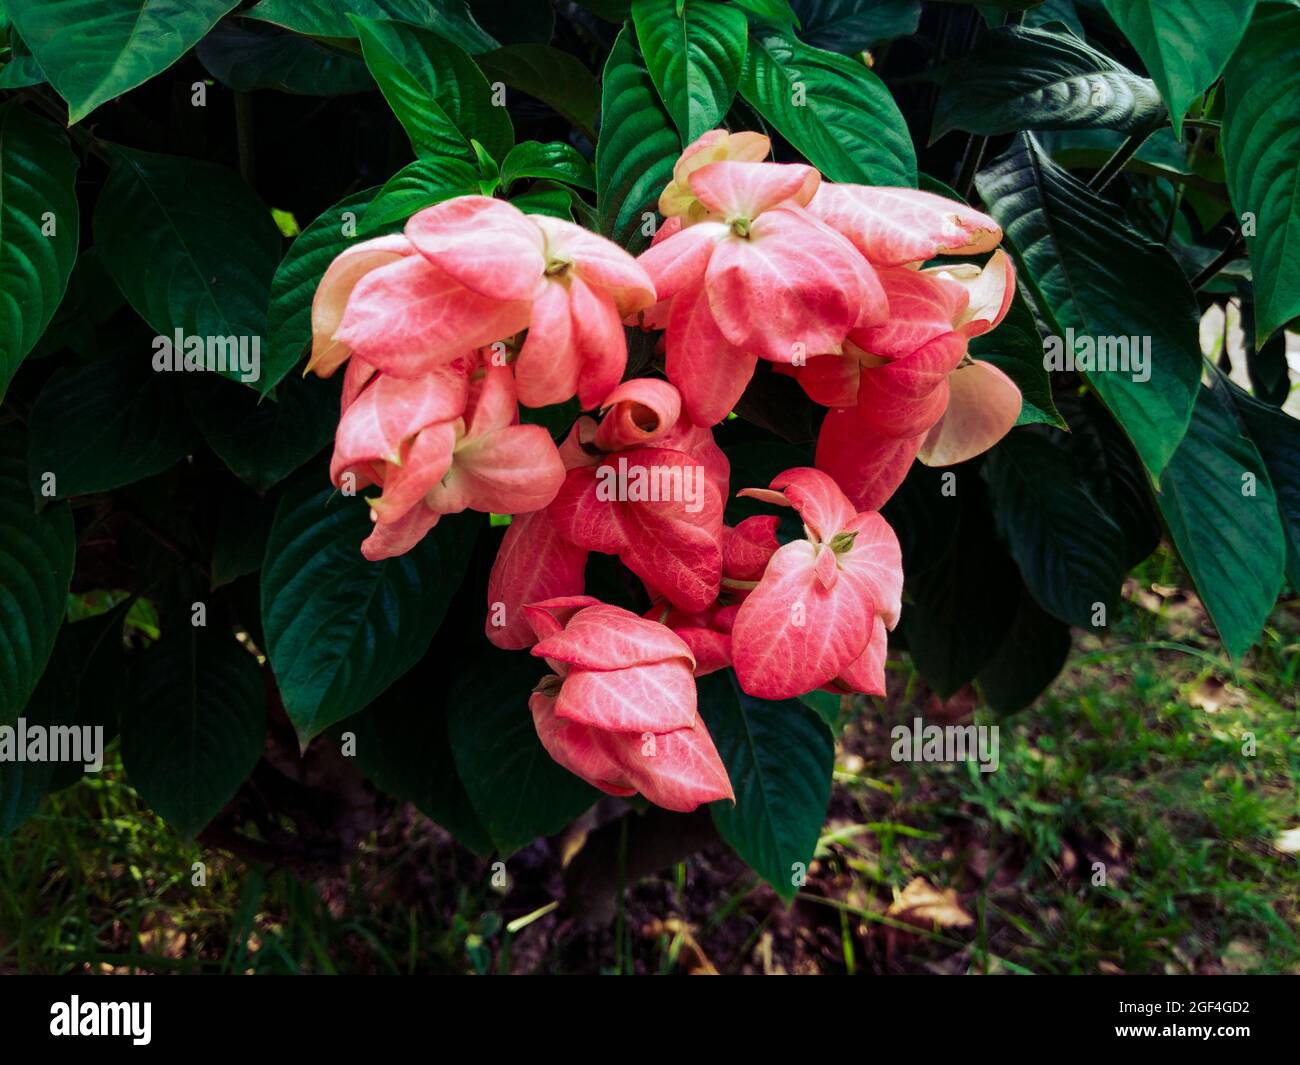 Shrub of Ashanti blood with pink blooming flowers Stock Photo